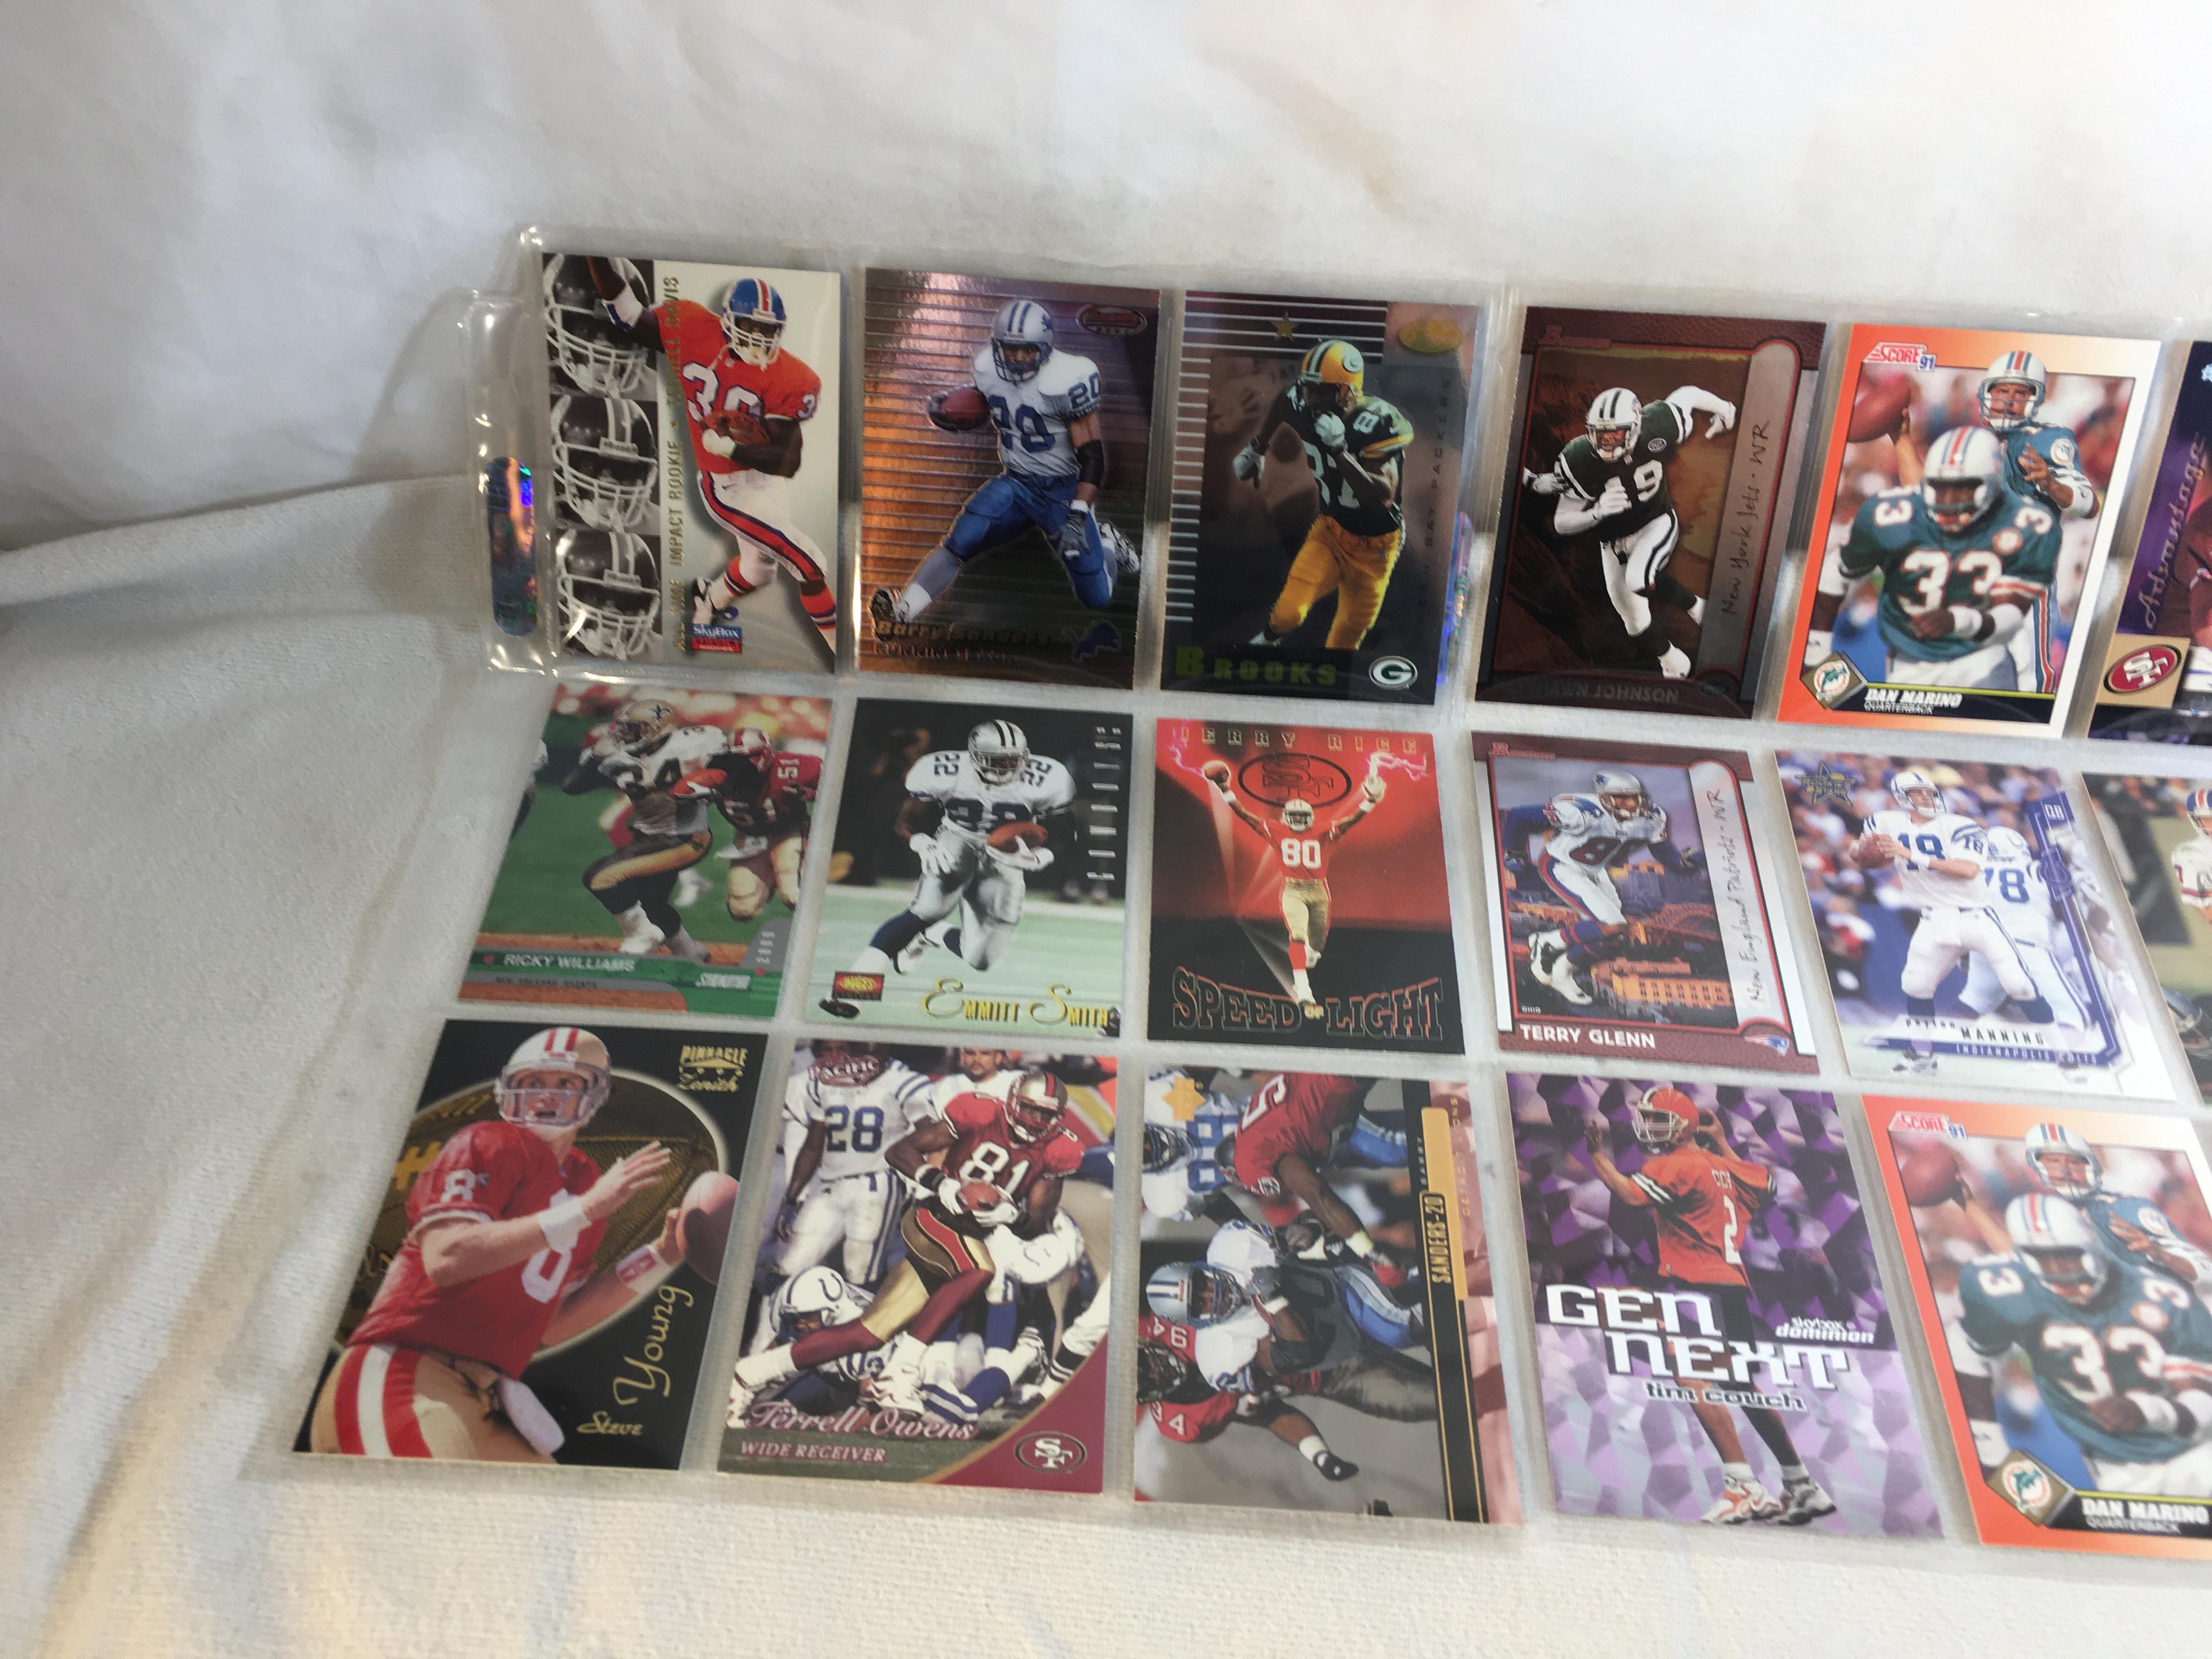 Lot of 18 Pcs Collector Modern NFL Football Sport Trading Assorted Cards & Players - See Pictures